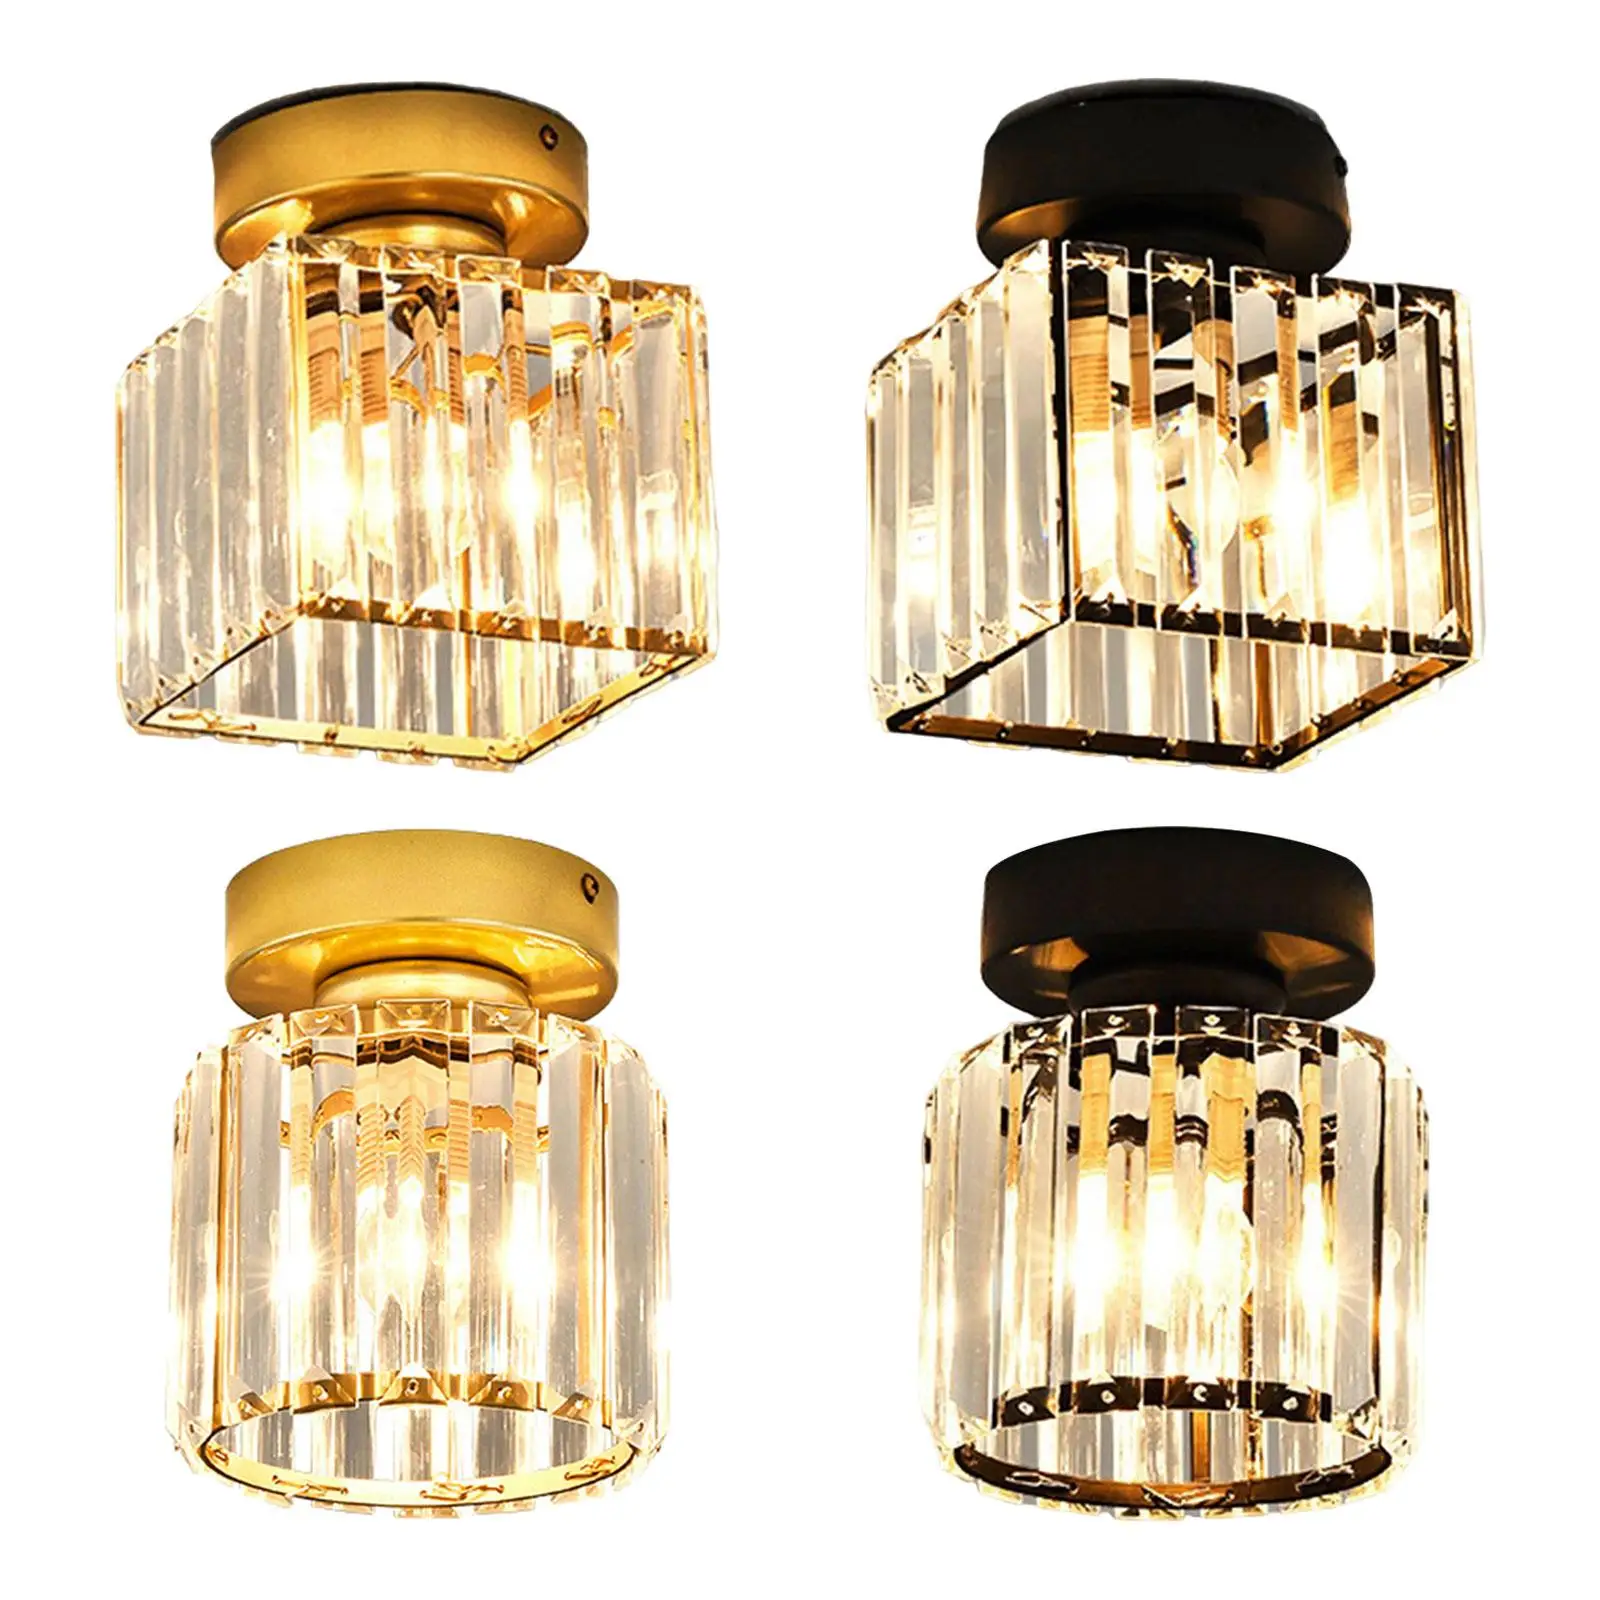 

LED Ceiling Lights Fixture Semi Flush Mount Glass Lampshade Kitchen Chandelier Lighting for Porch Home Hallway Hotel Bedroom